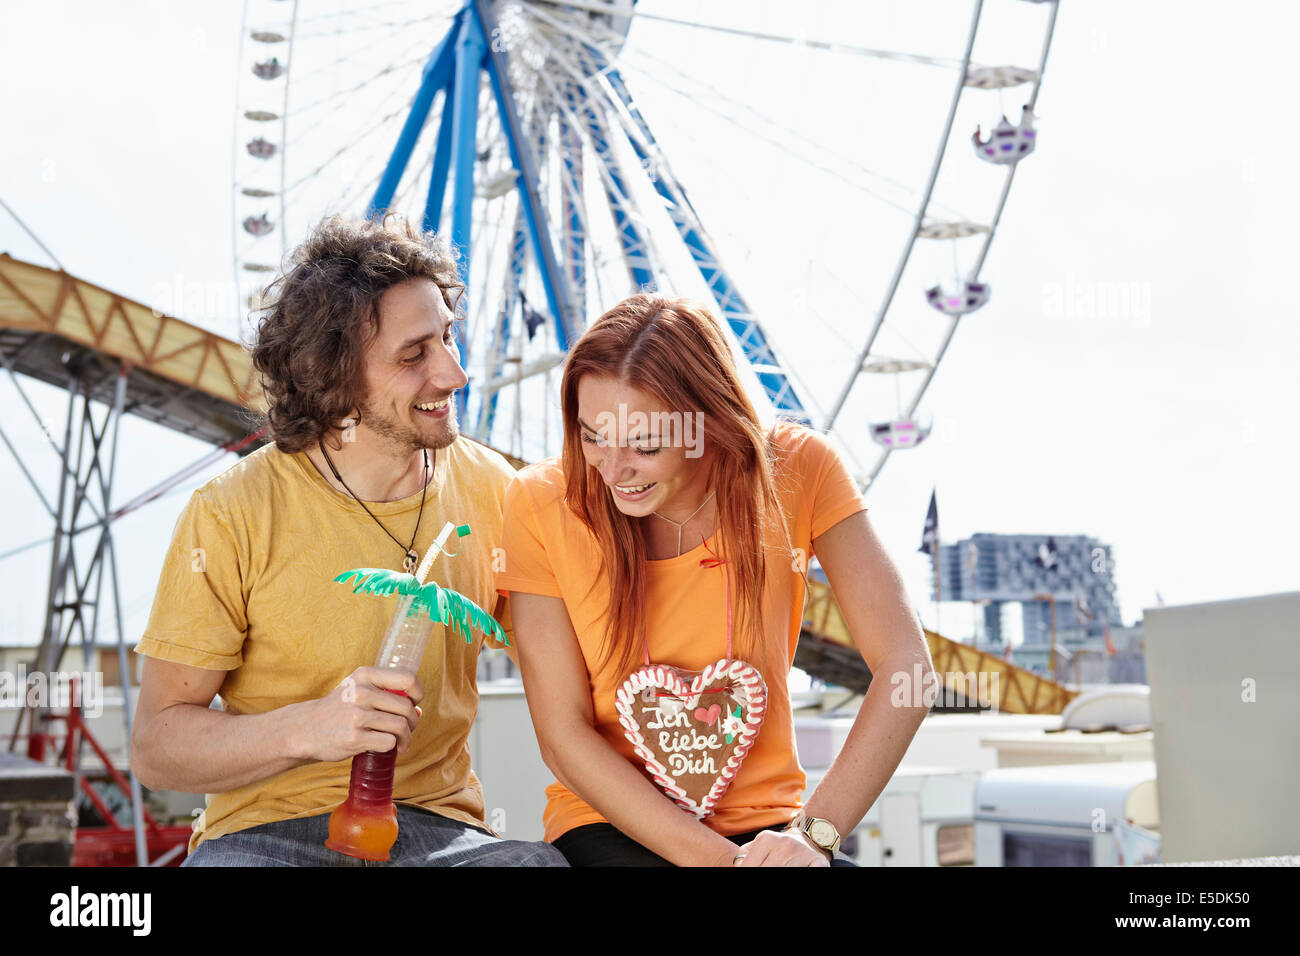 Happy young couple on a funfair Stock Photo